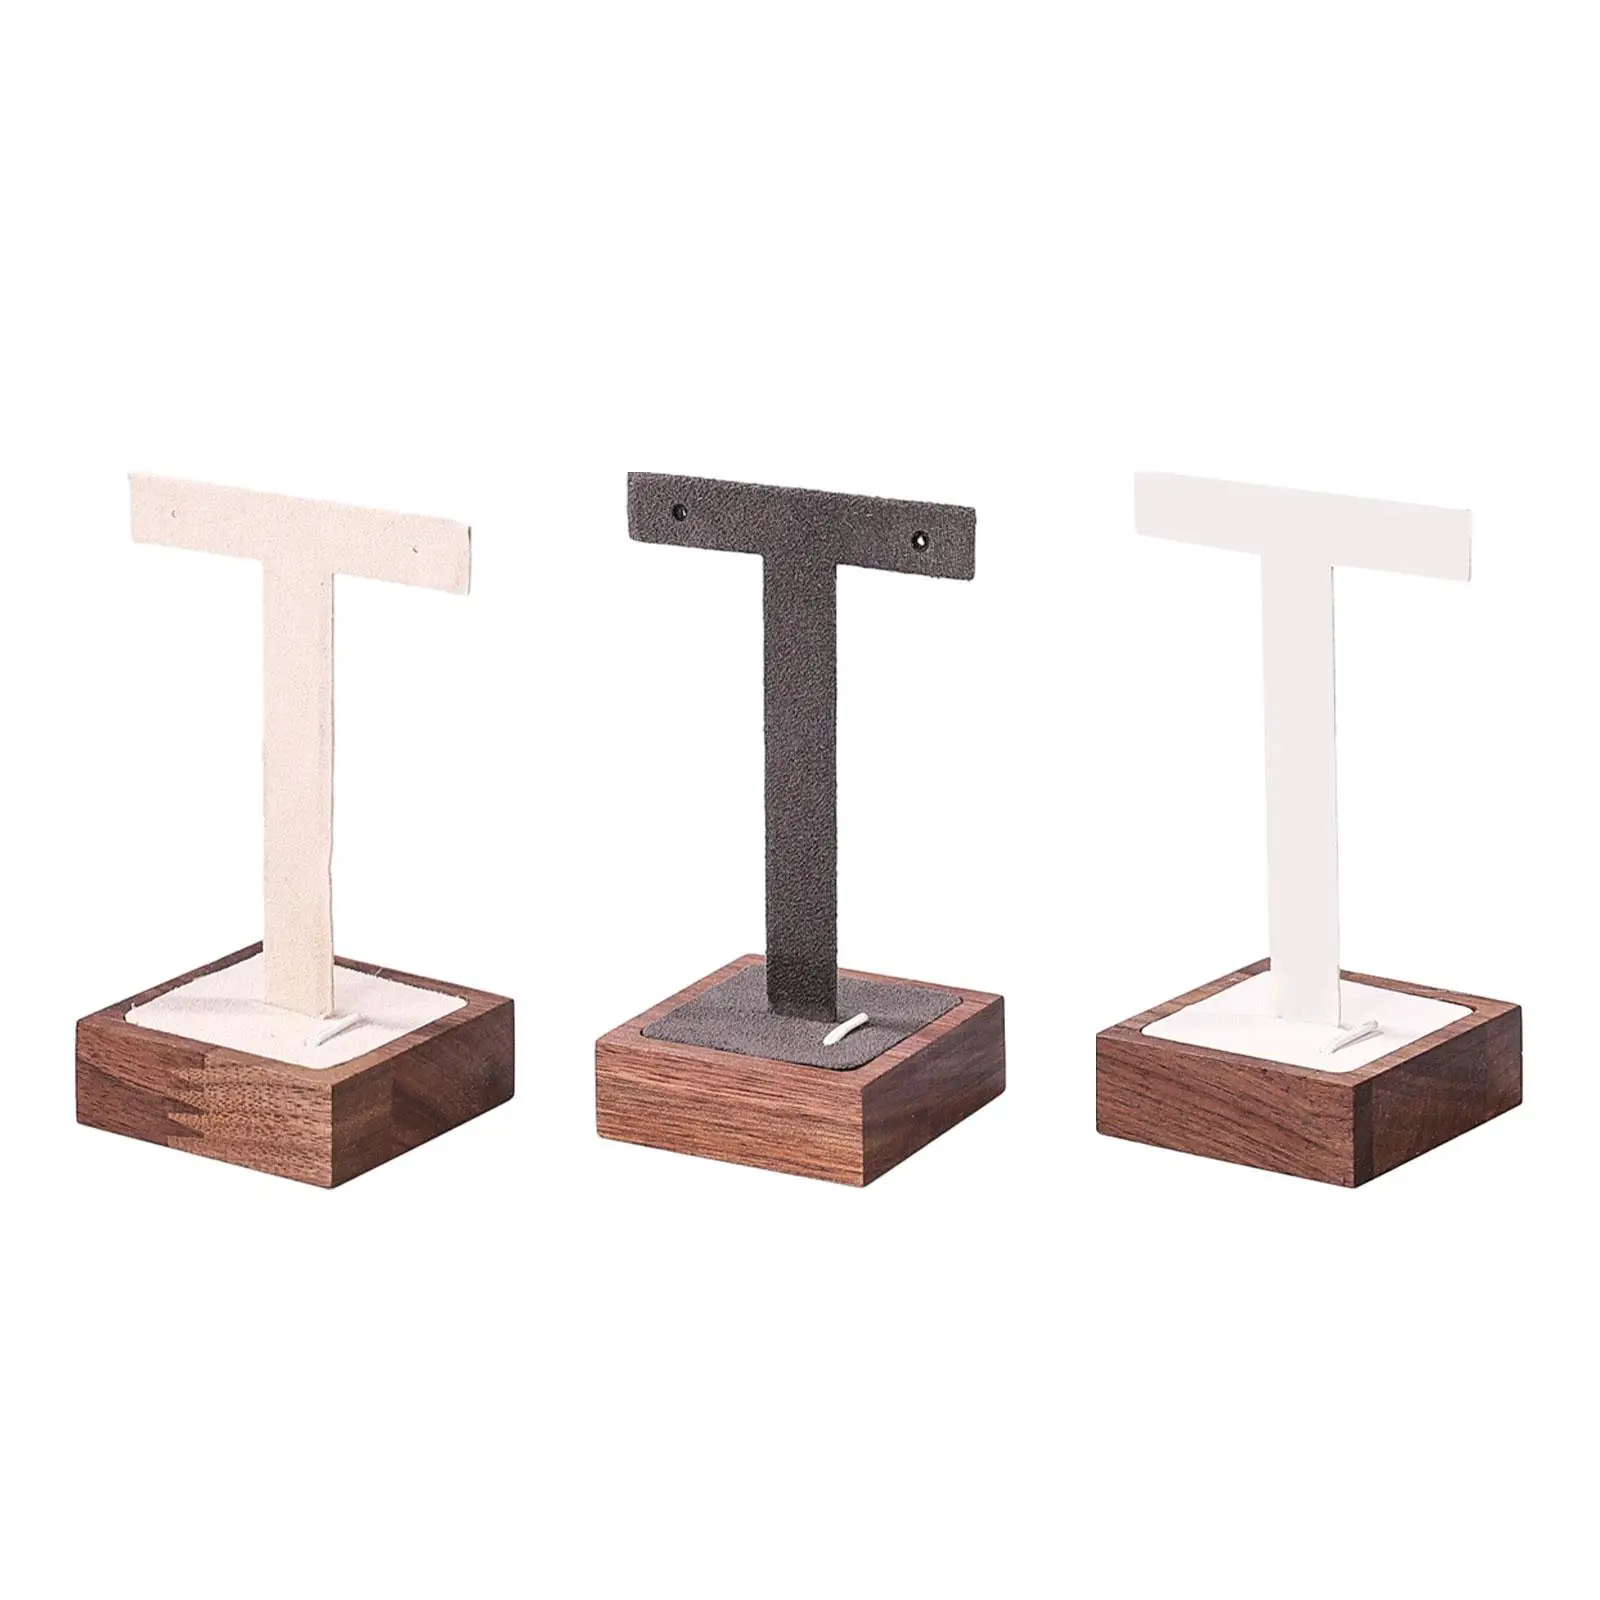 T shape Earring Display Stand, Wooden Base T Bar Earring Display Holder, Jewelry Organizer for Dangle Earring Jewelry Rack